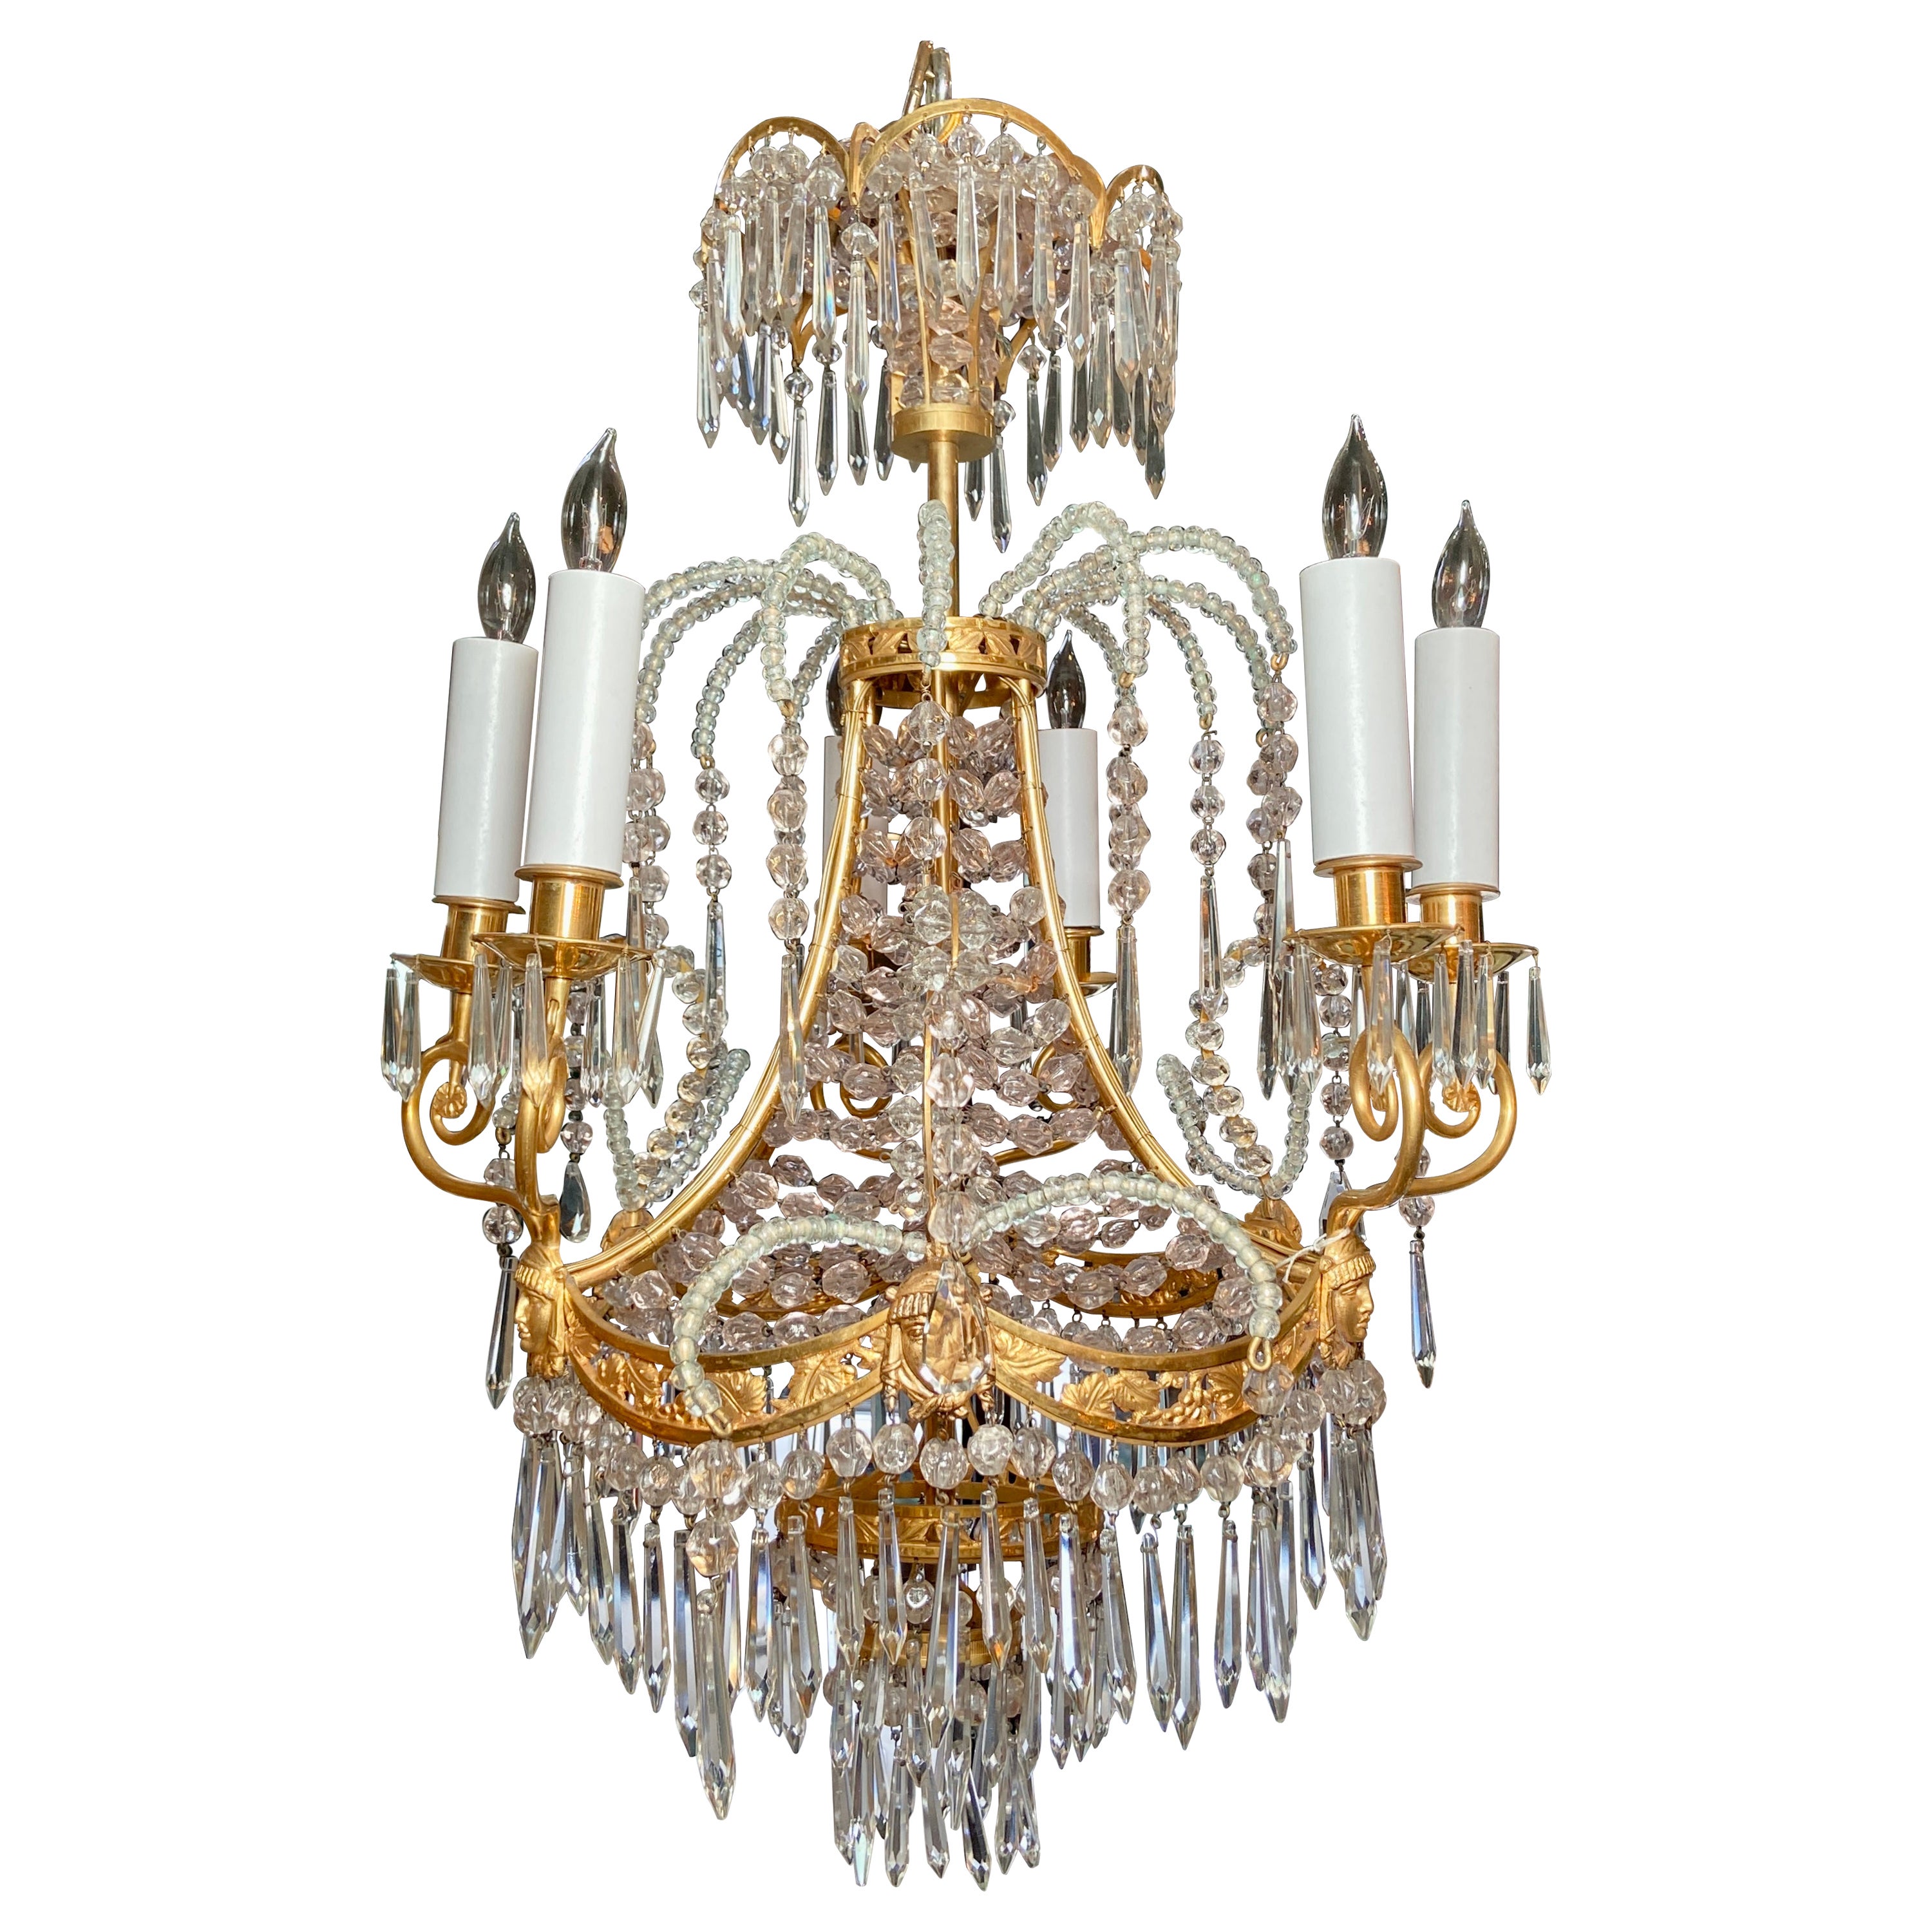 Antique French Crystal and Bronze D'Ore Chandelier, Circa 1880